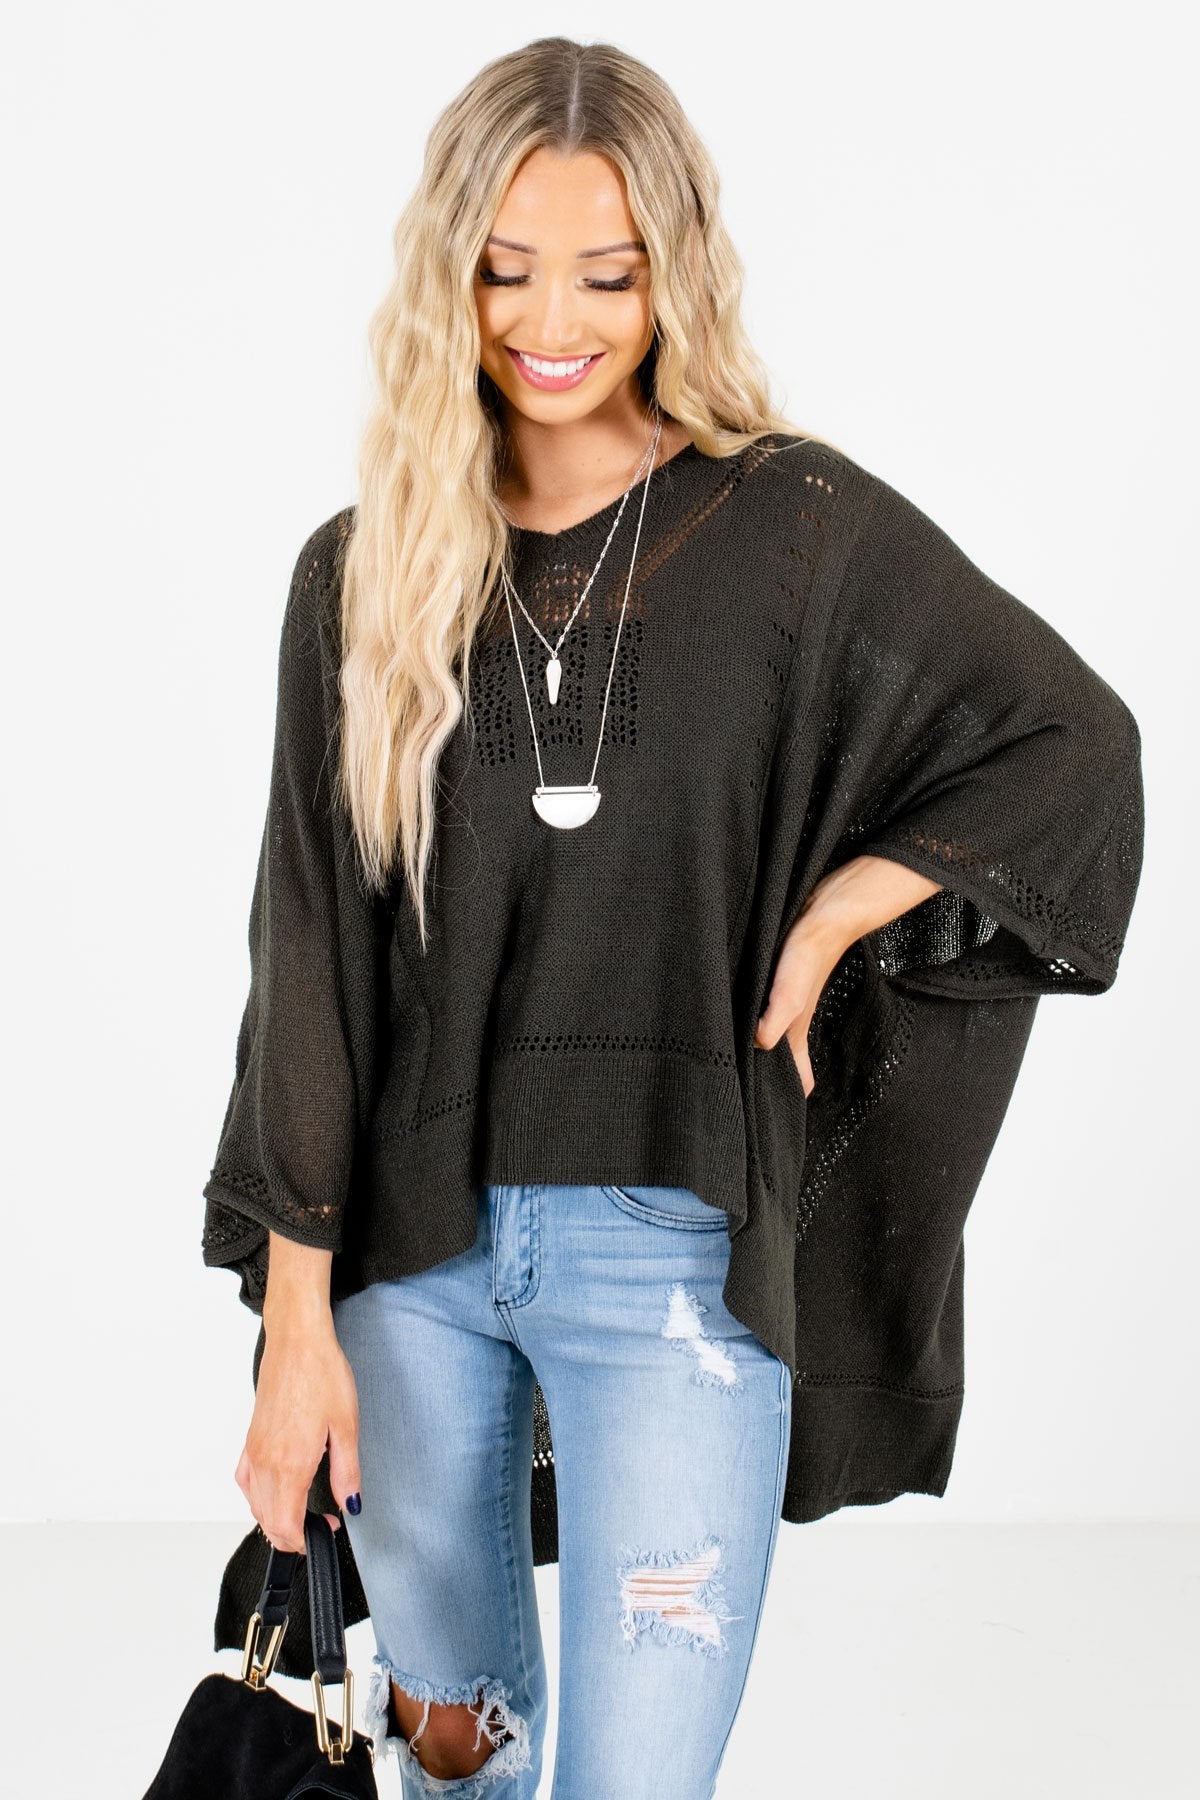 Charcoal Gray Lightweight Knit Material Boutique Ponchos for Women